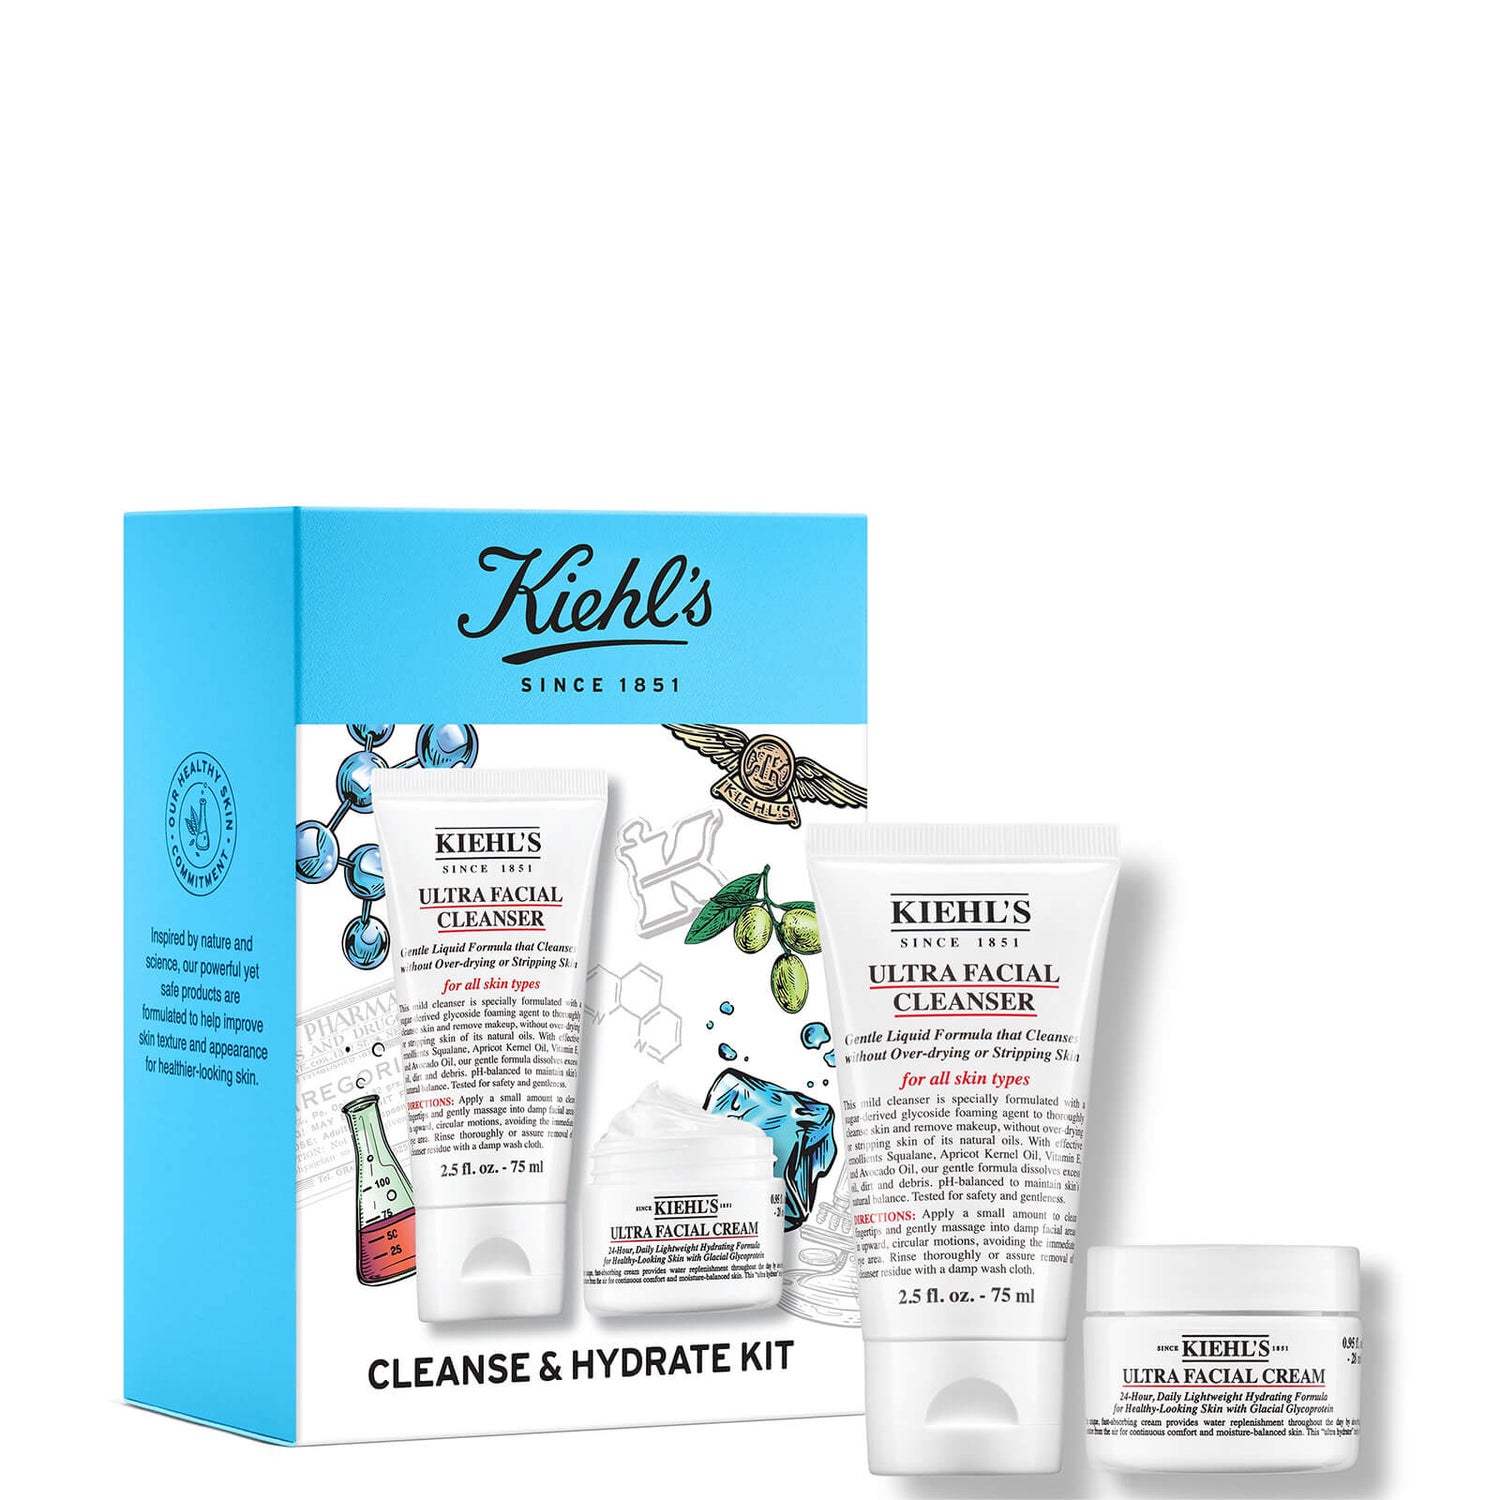 Kit Cleanse and Hydrate Kit Kiehl's 28ml